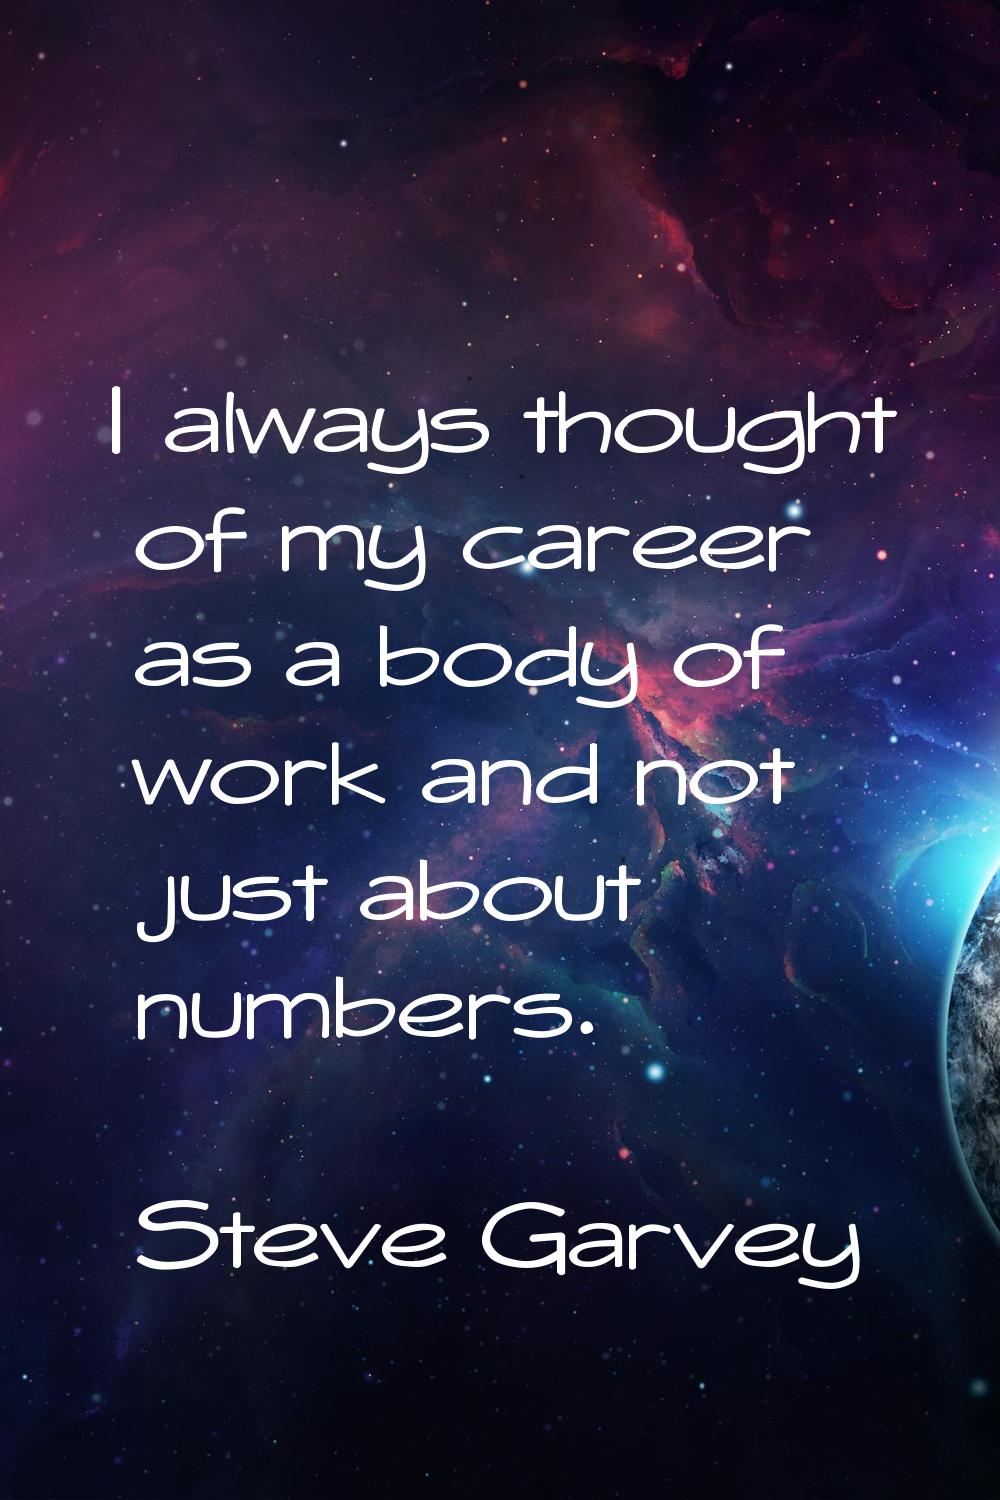 I always thought of my career as a body of work and not just about numbers.